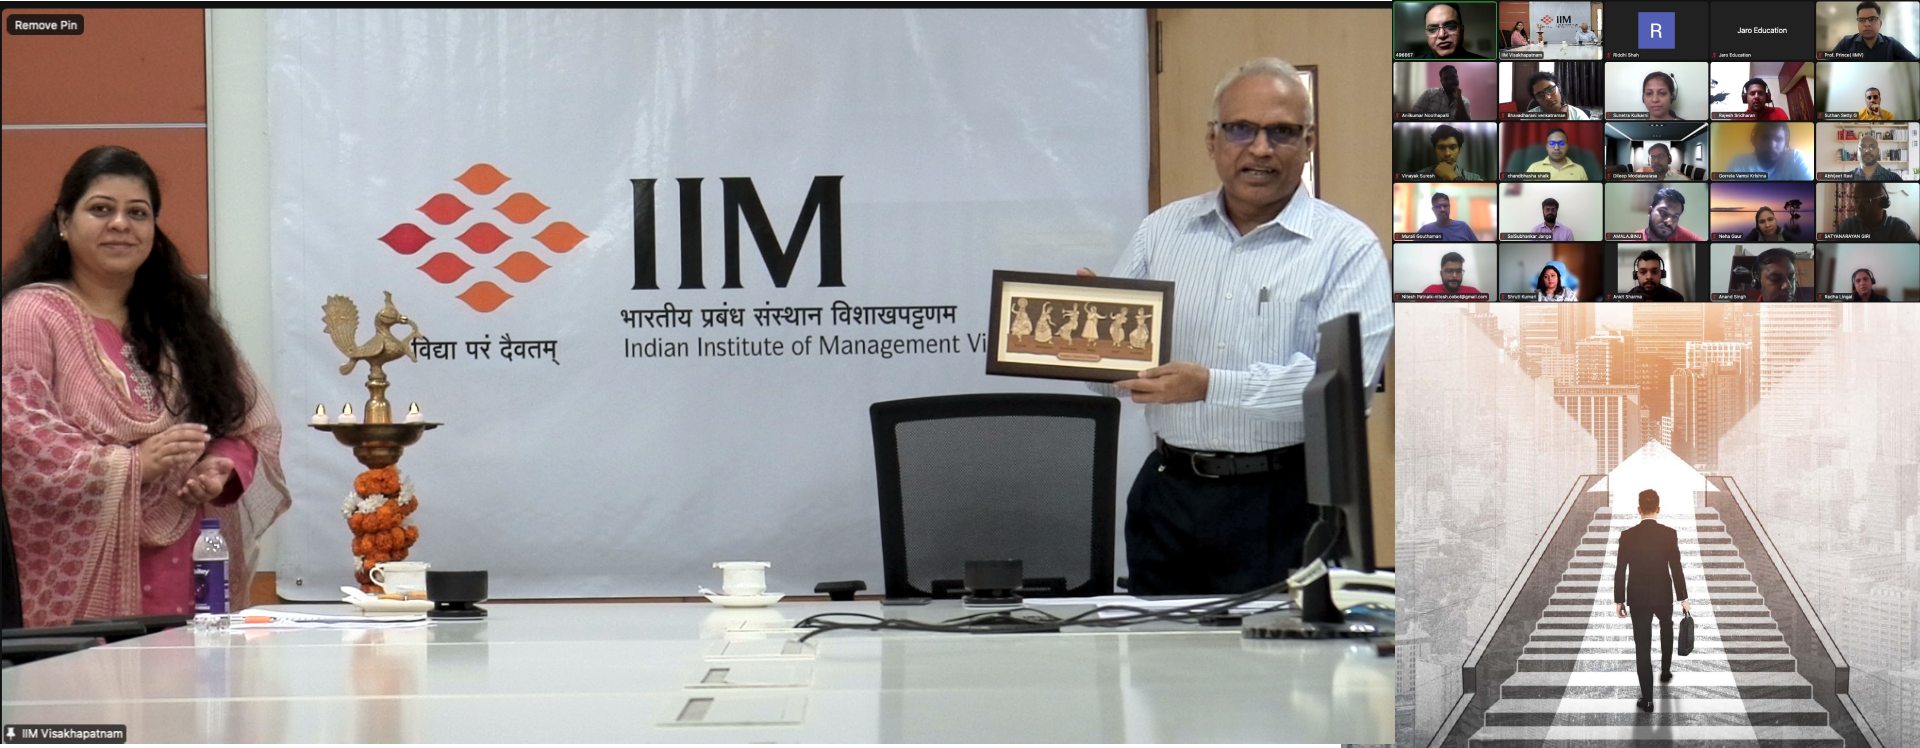 IIM Visakhapatnam launches a one-year Executive Post Graduate Certificate Program in General Management